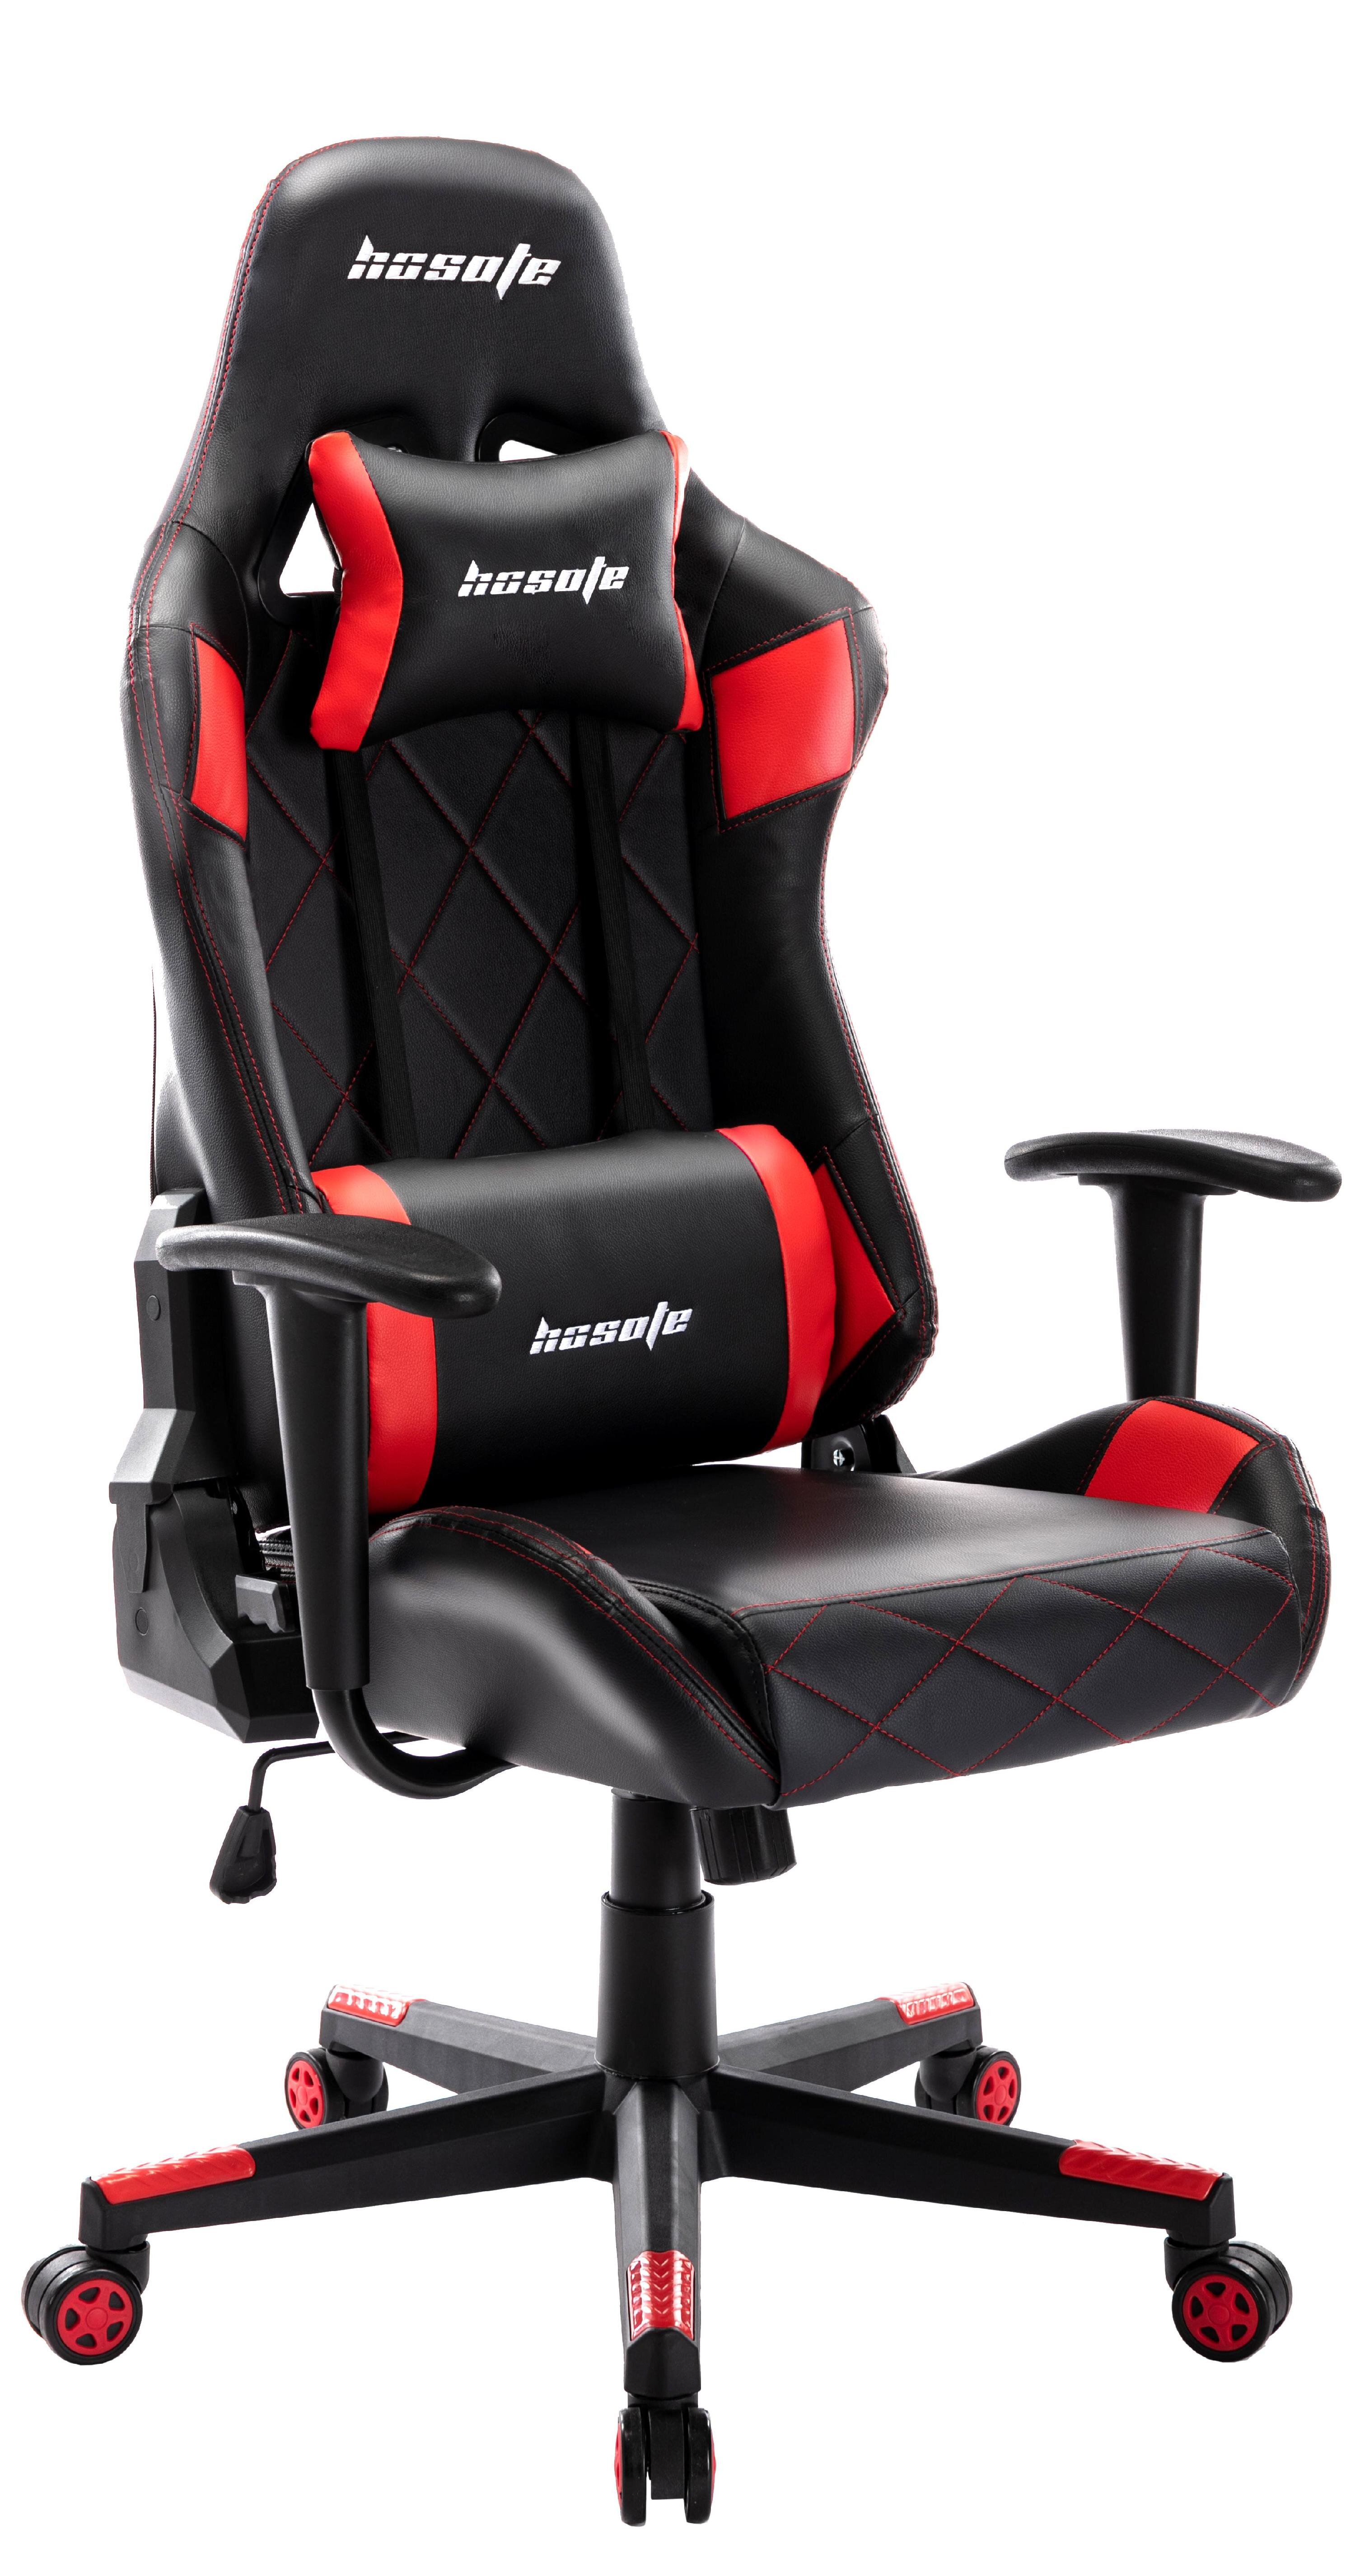 Red Ansley&HosHo Gaming Chair Racing Chair Video Game Chair Comfortable PU Leather Office Desk Chair Height Adjustable 360° Swivel Movable 